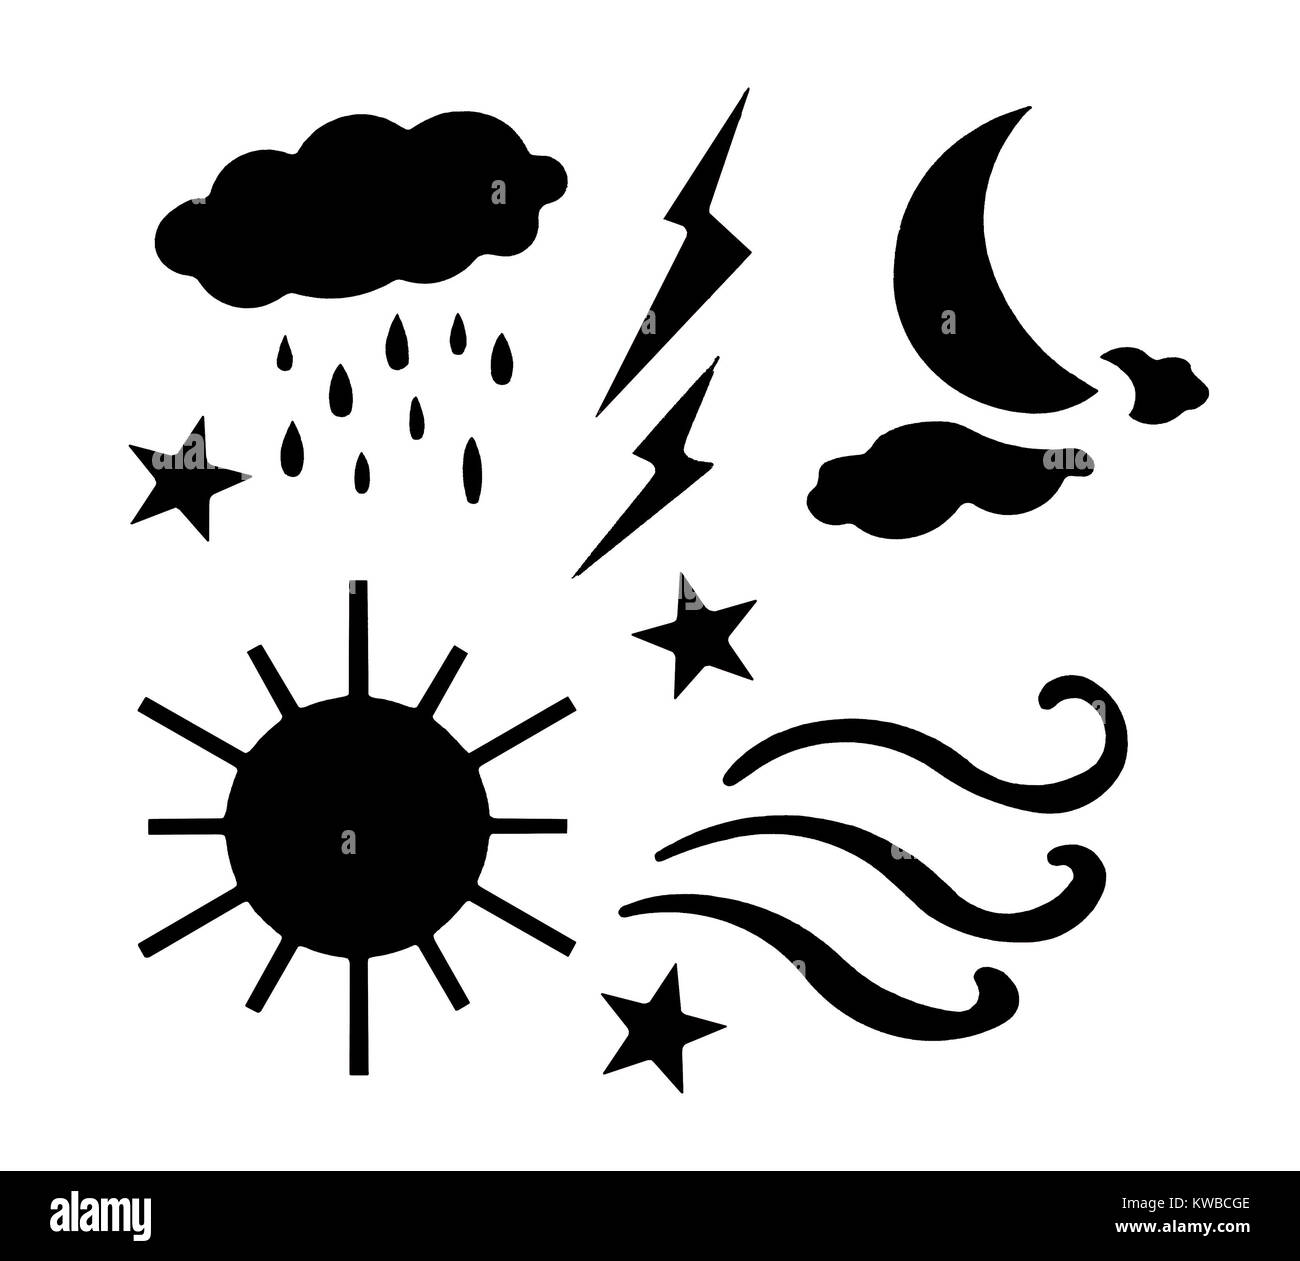 Weather stencil shapes on a white  background Stock Photo